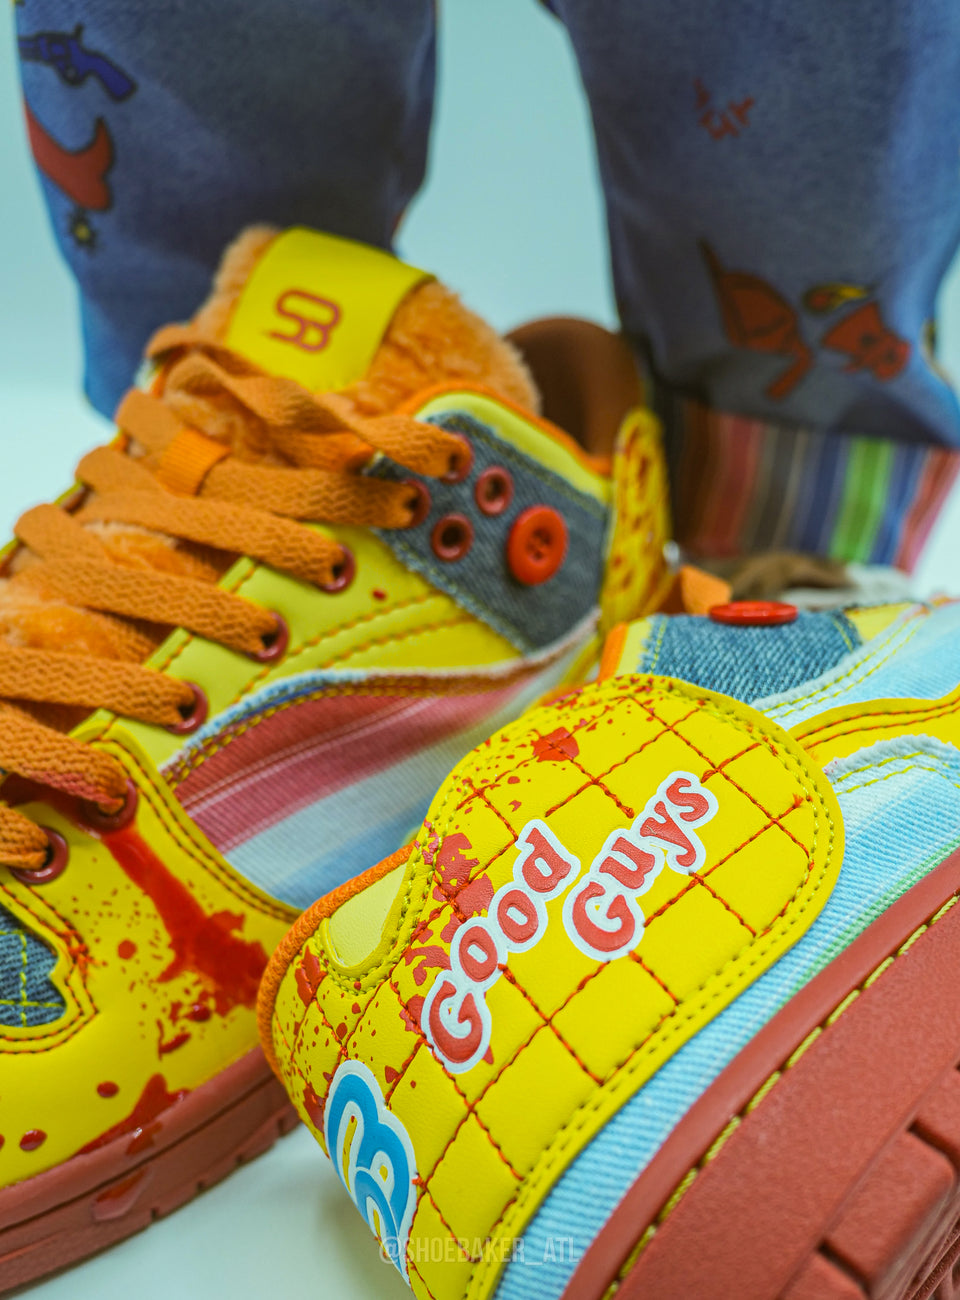 Child’s Play Baker Low PRE-ORDER